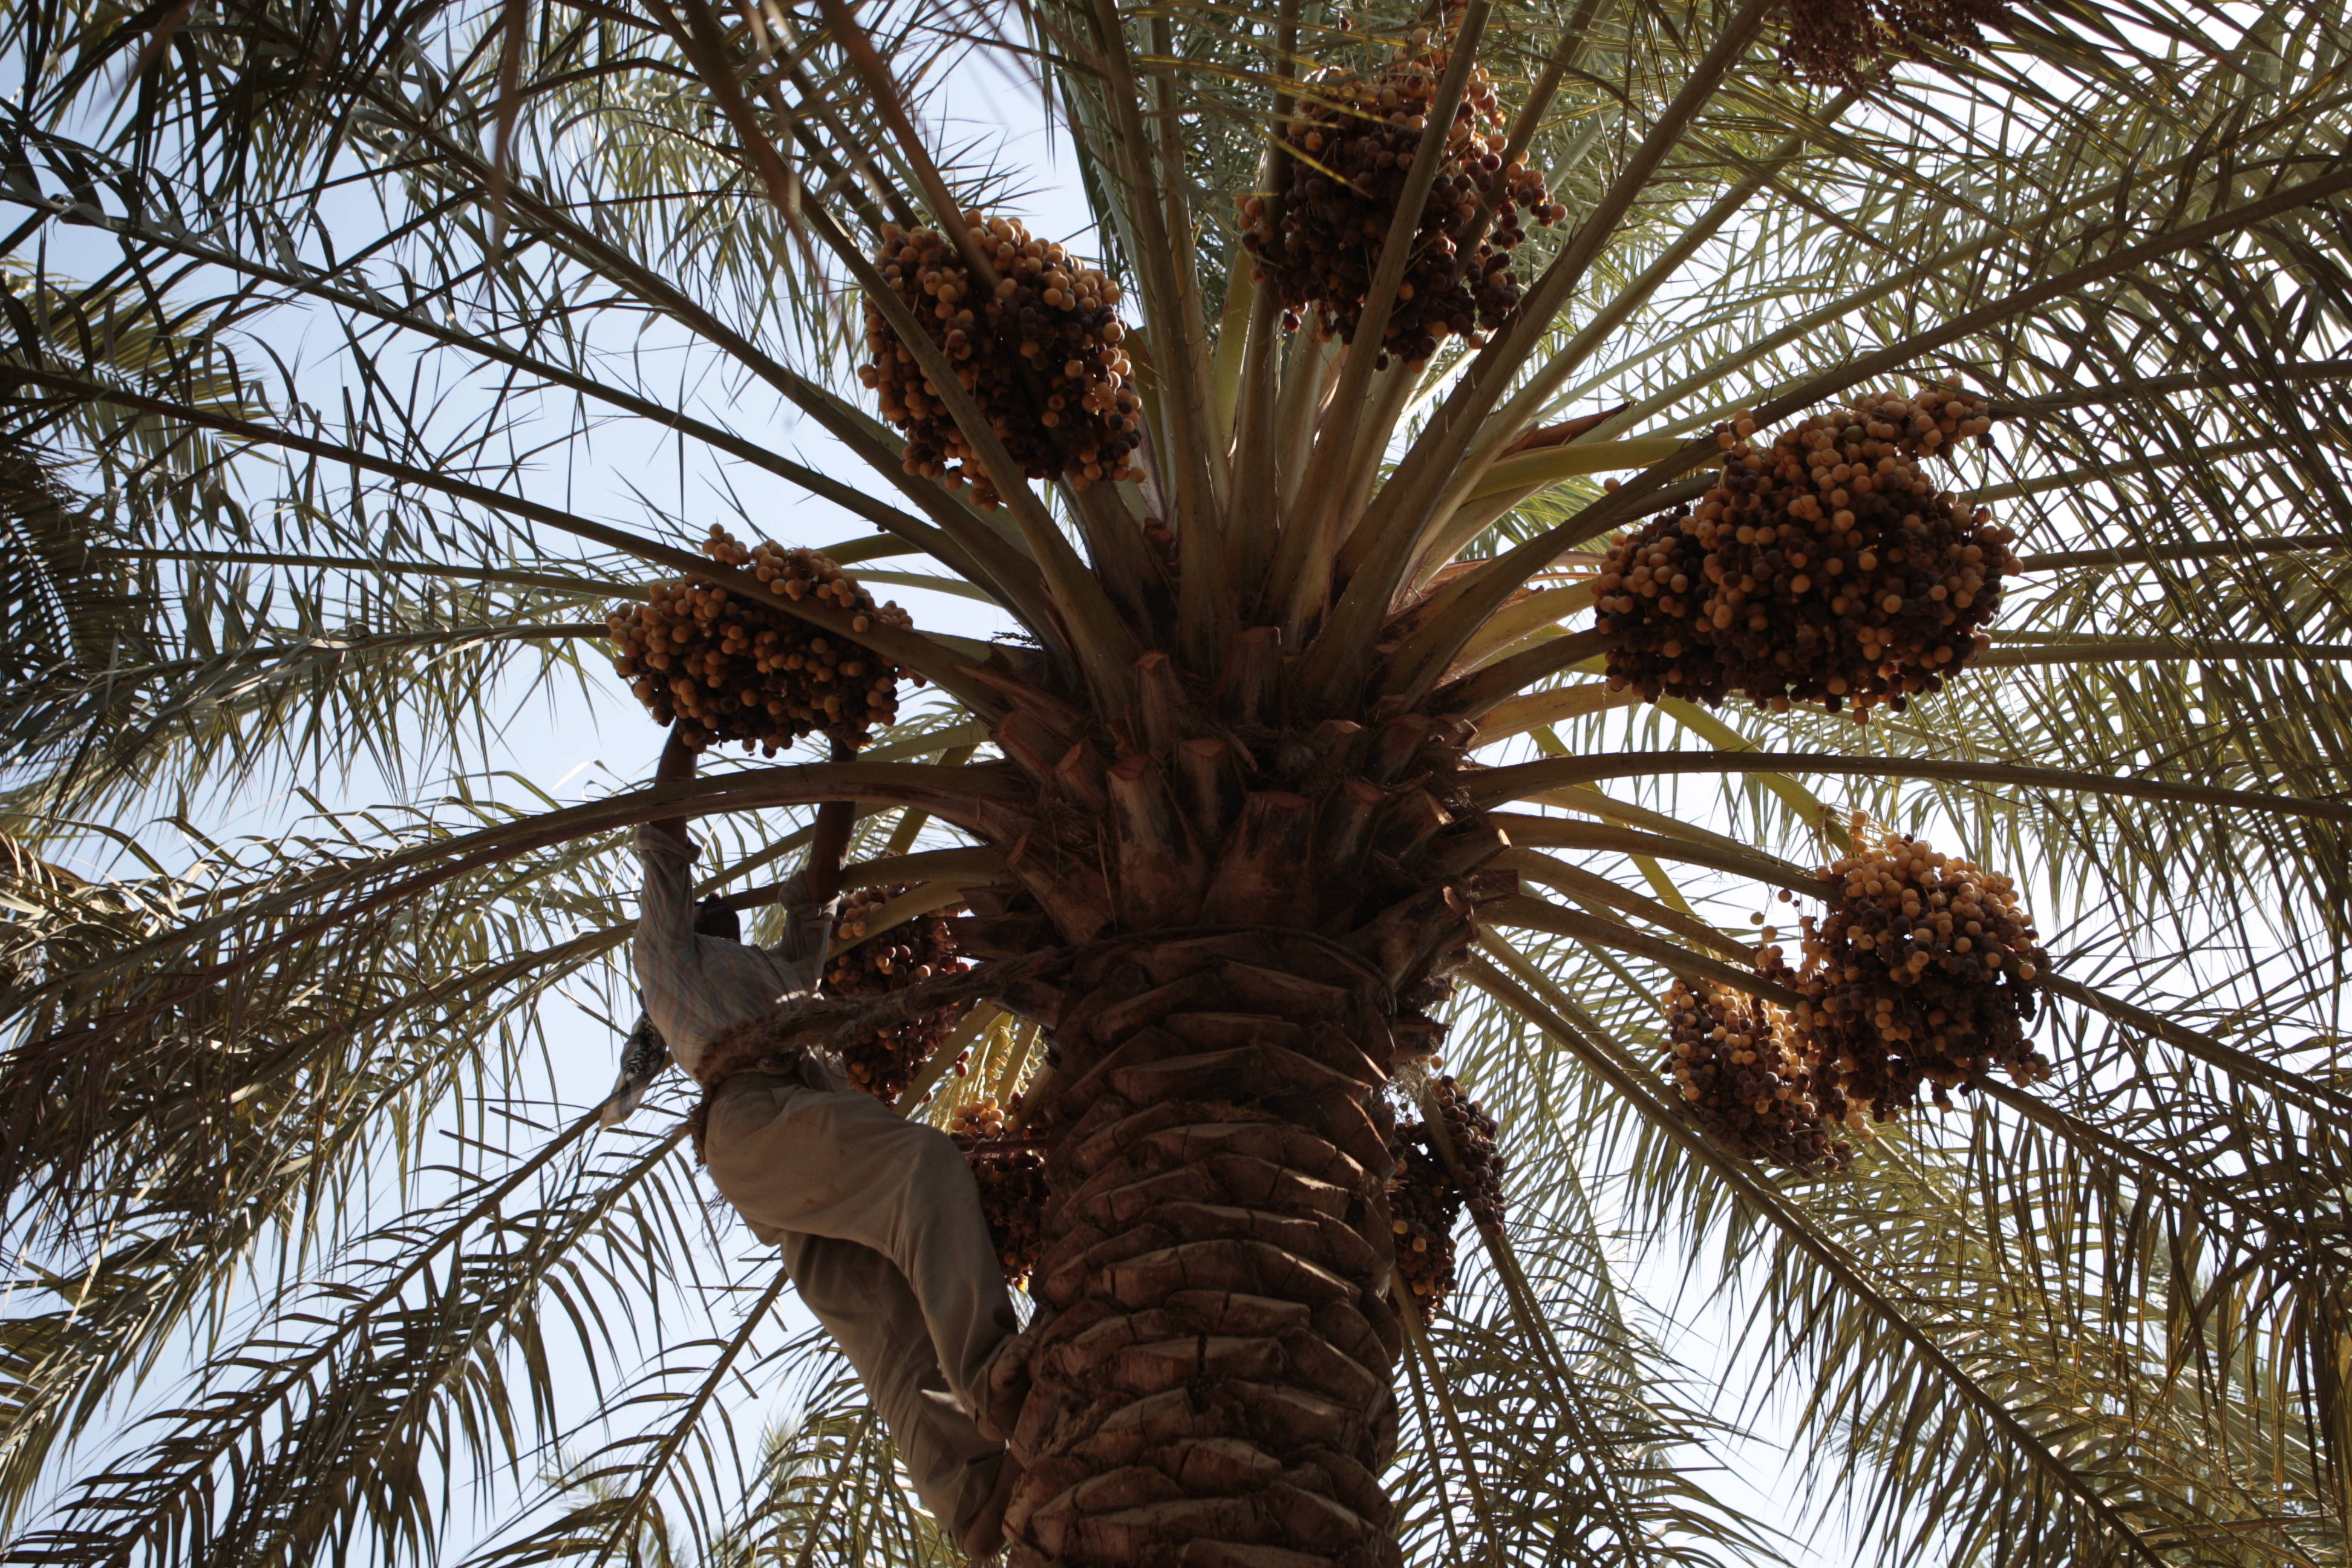 Development and expansion of sustainable date palm production systems